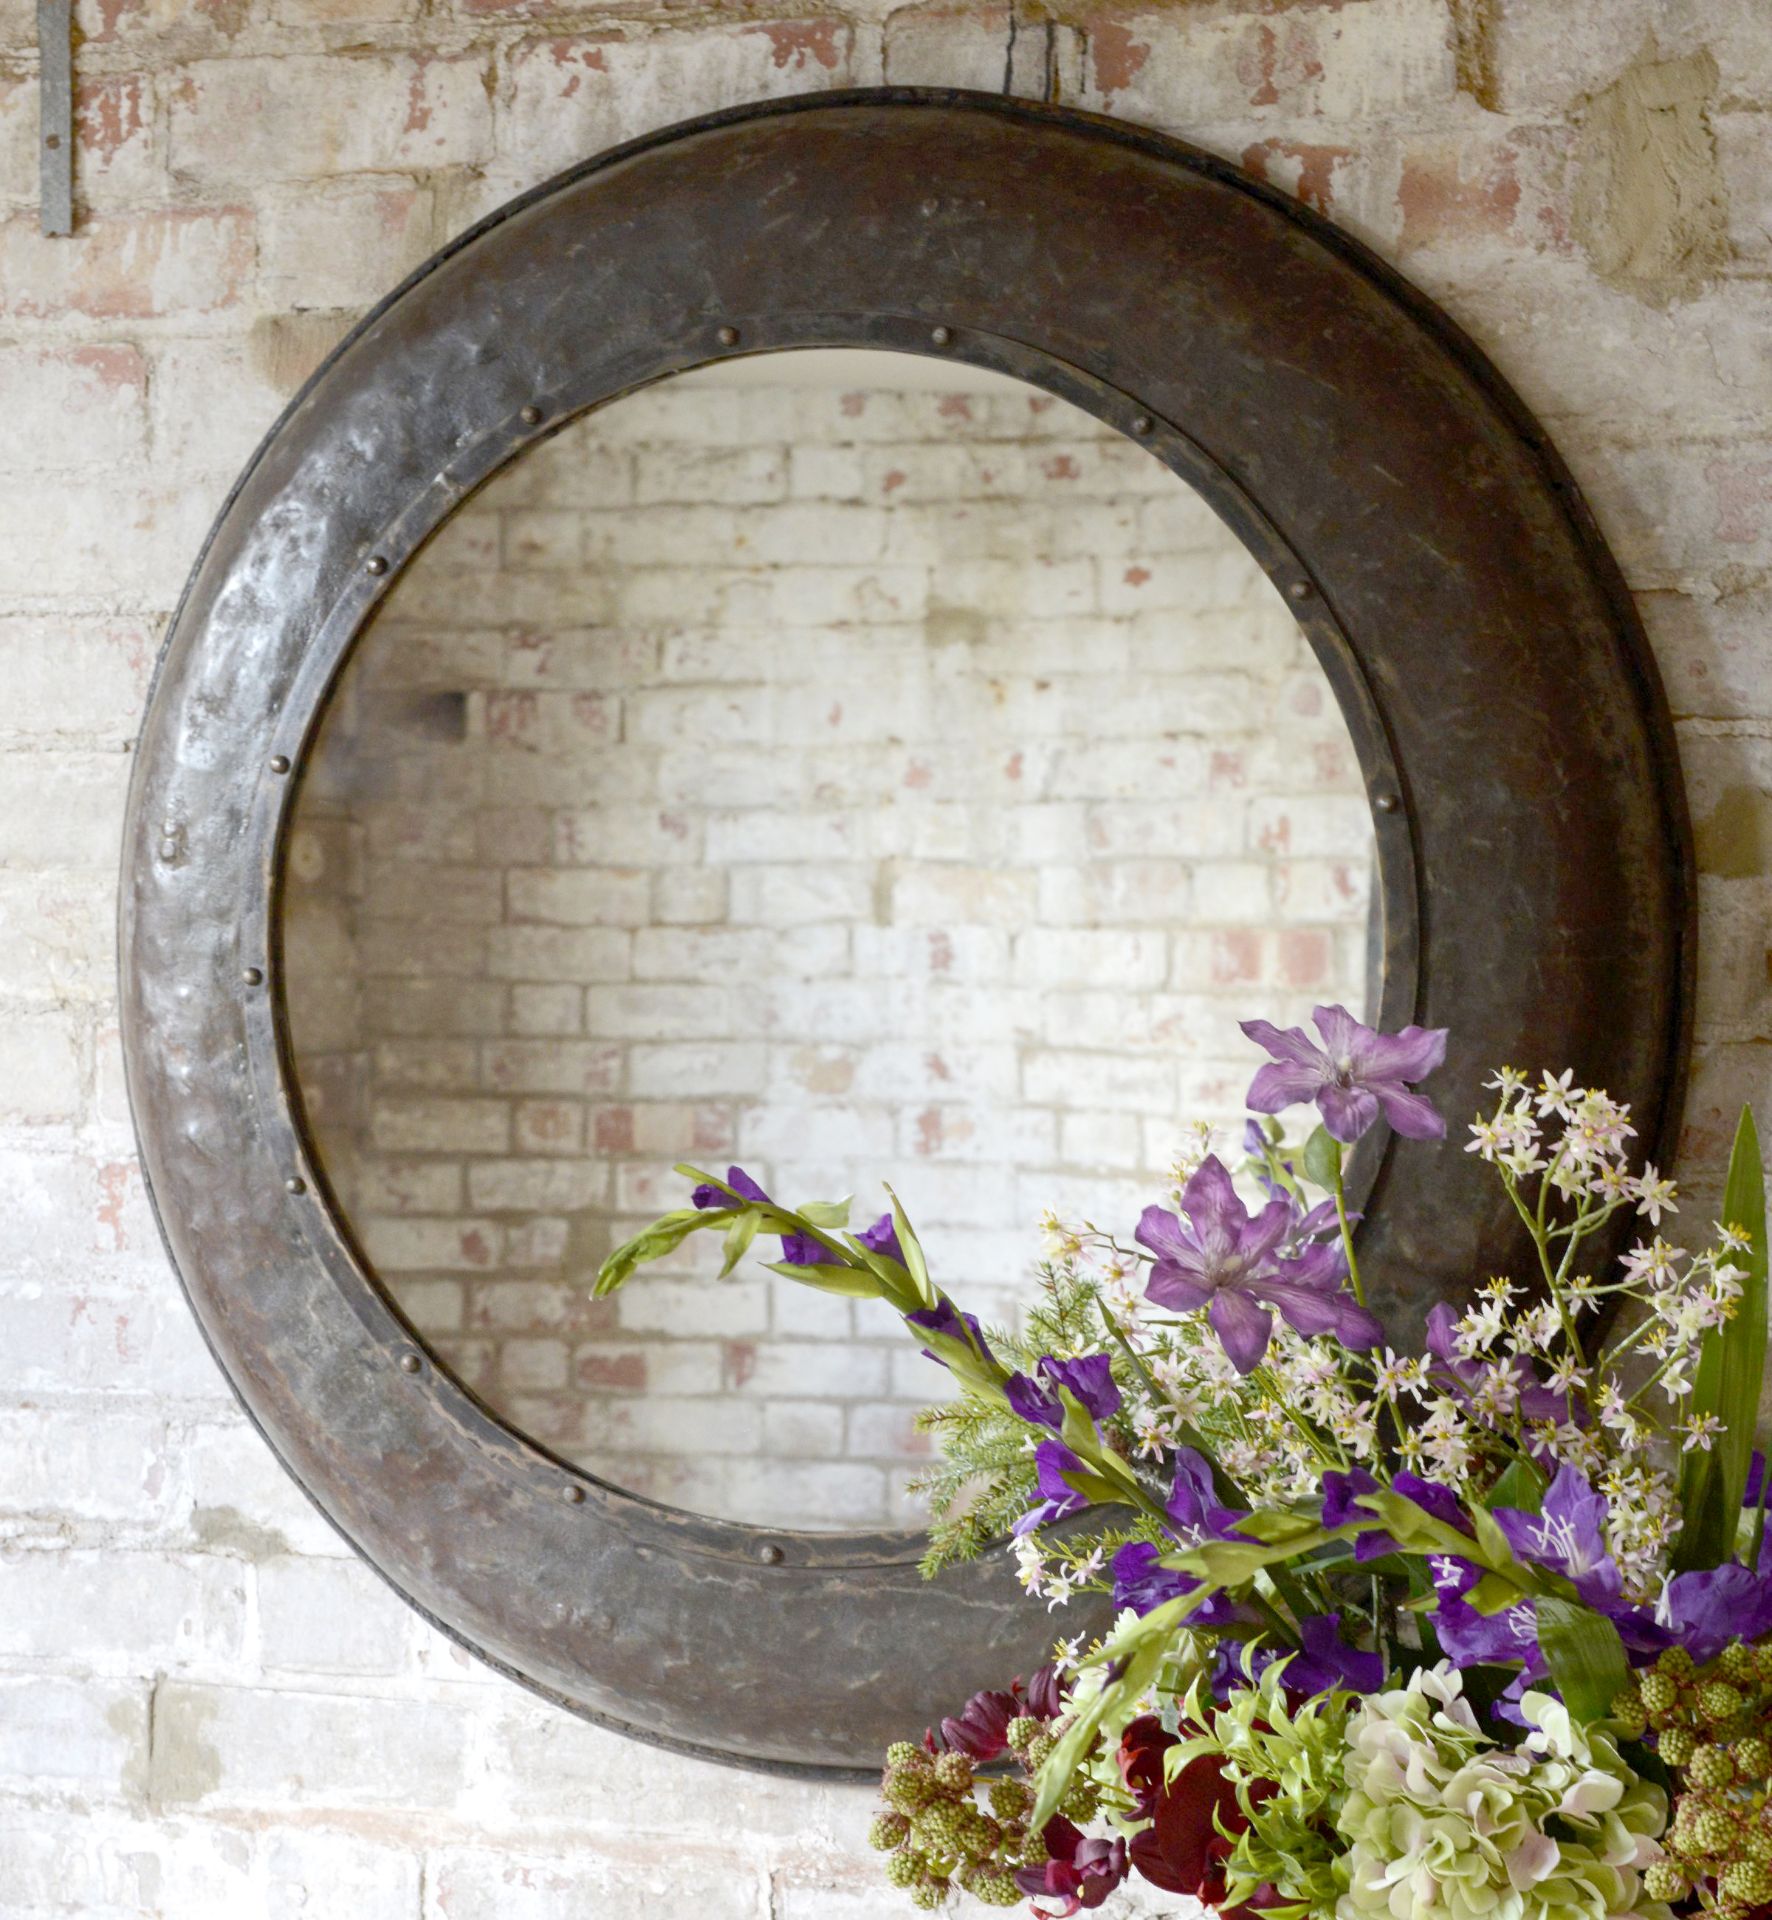 Iron Mirror: This iron framed mirror will lend a rustic and stylish look to any interior.